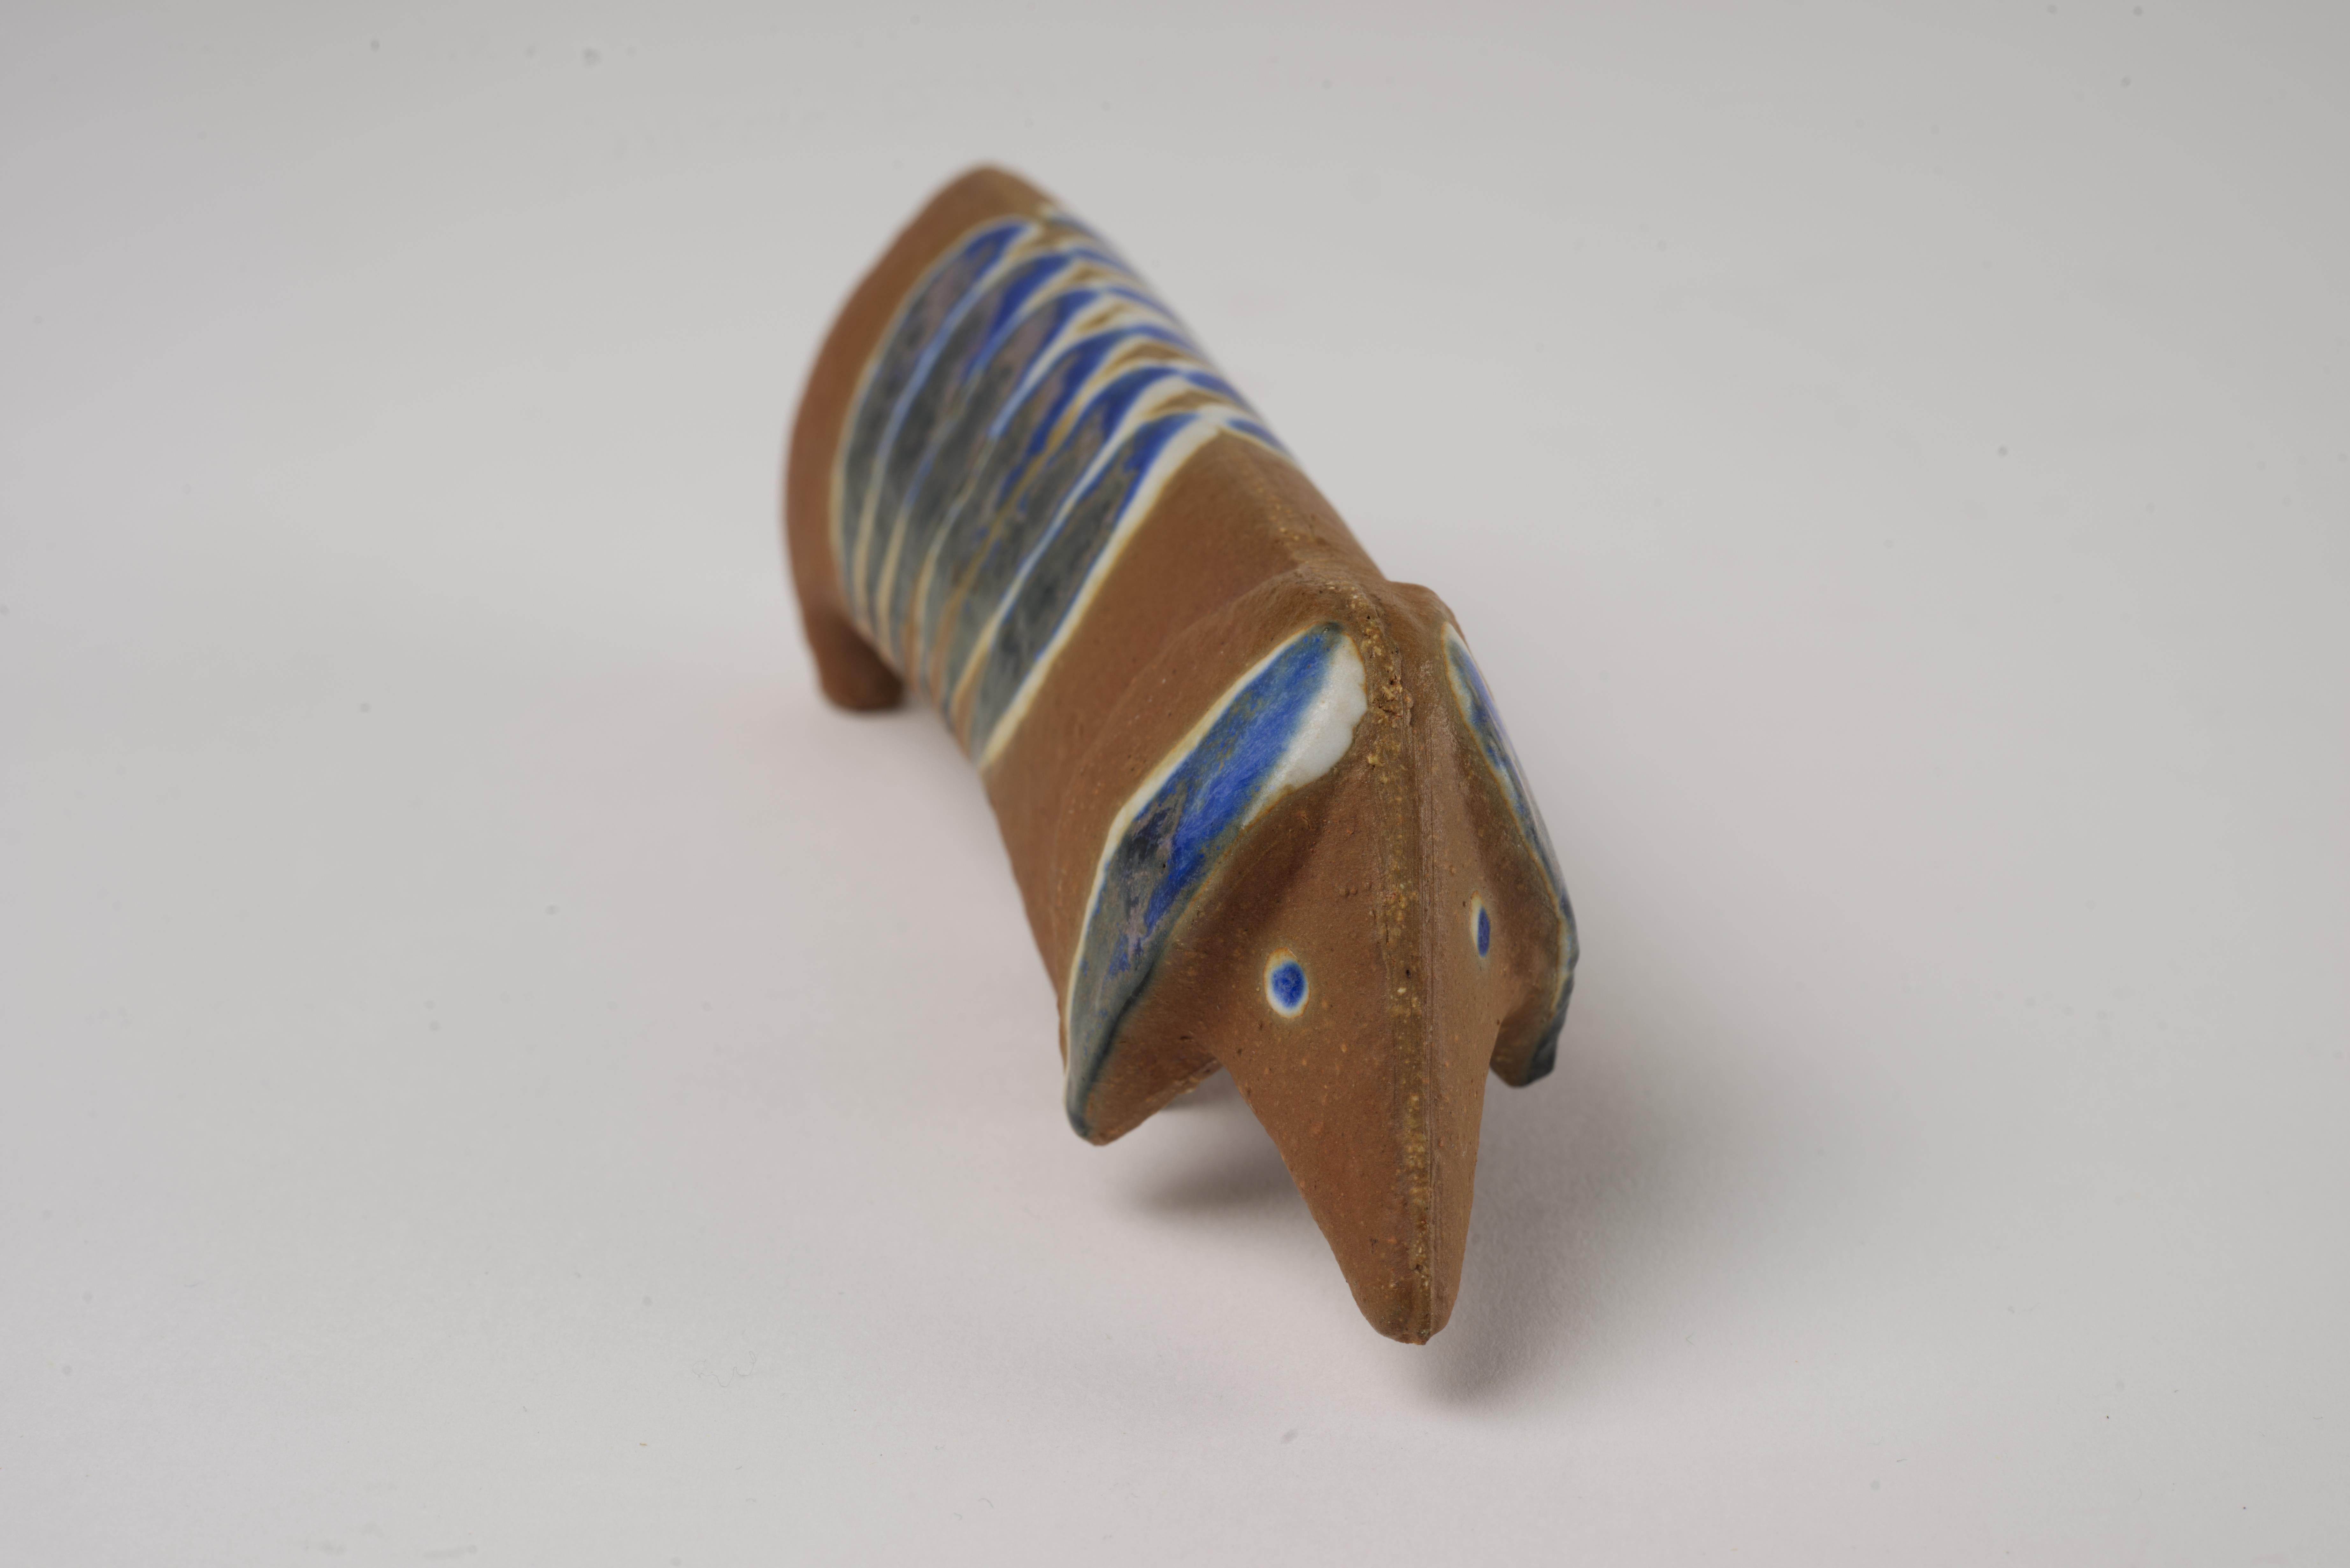  Dachshund dog is made of chamotte stoneware with geometric decoration in blue and white semi-matte glaze. It was designed by Lisa Larson (1931-2024) in 1955 as part of the ”Lilla zoo” (Small Zoo) series for the Gustavsberg Porcelain Factory. 

The